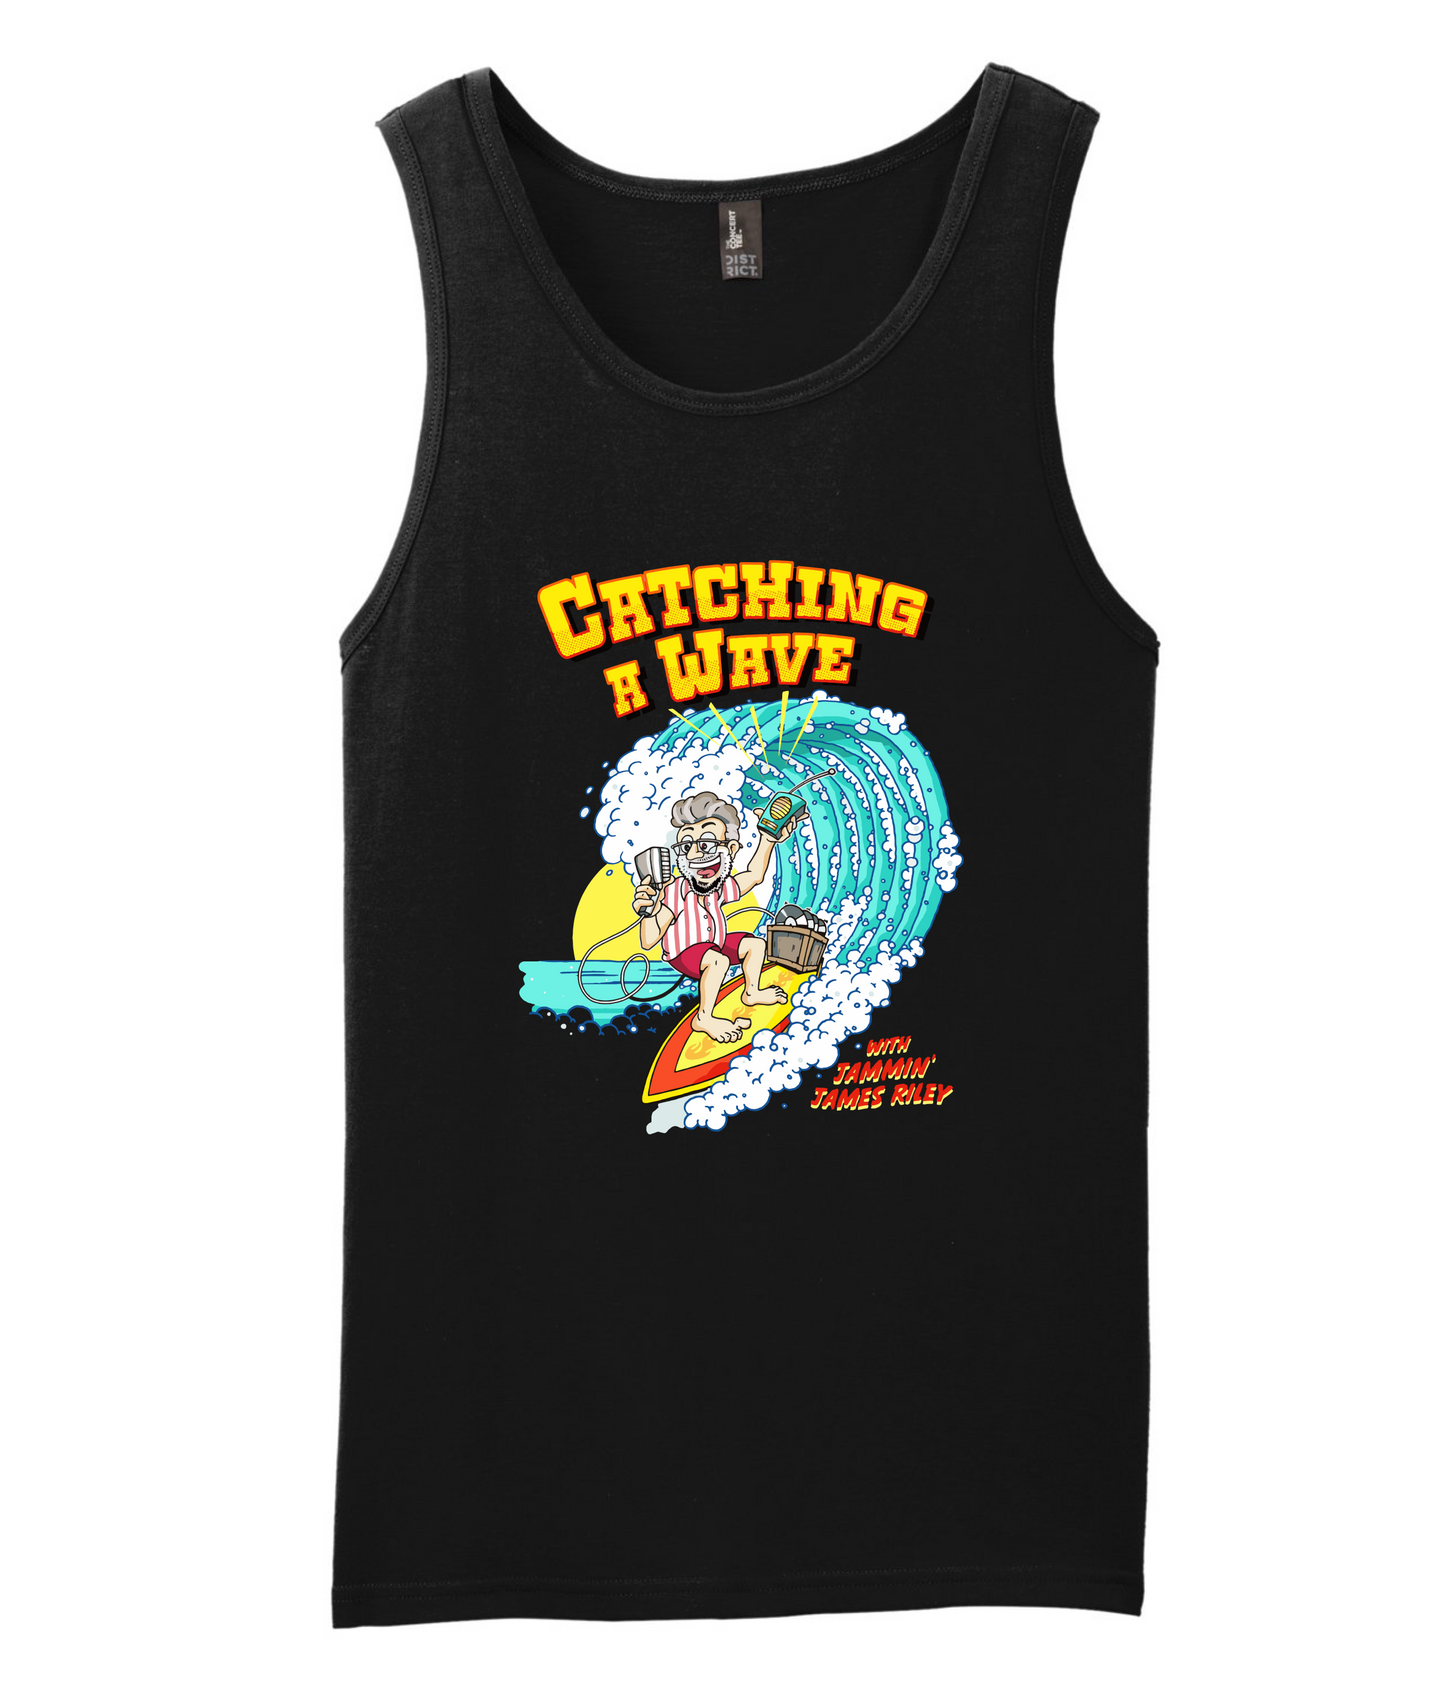 Team Riley Radio - Catching a Wave - Tank Top